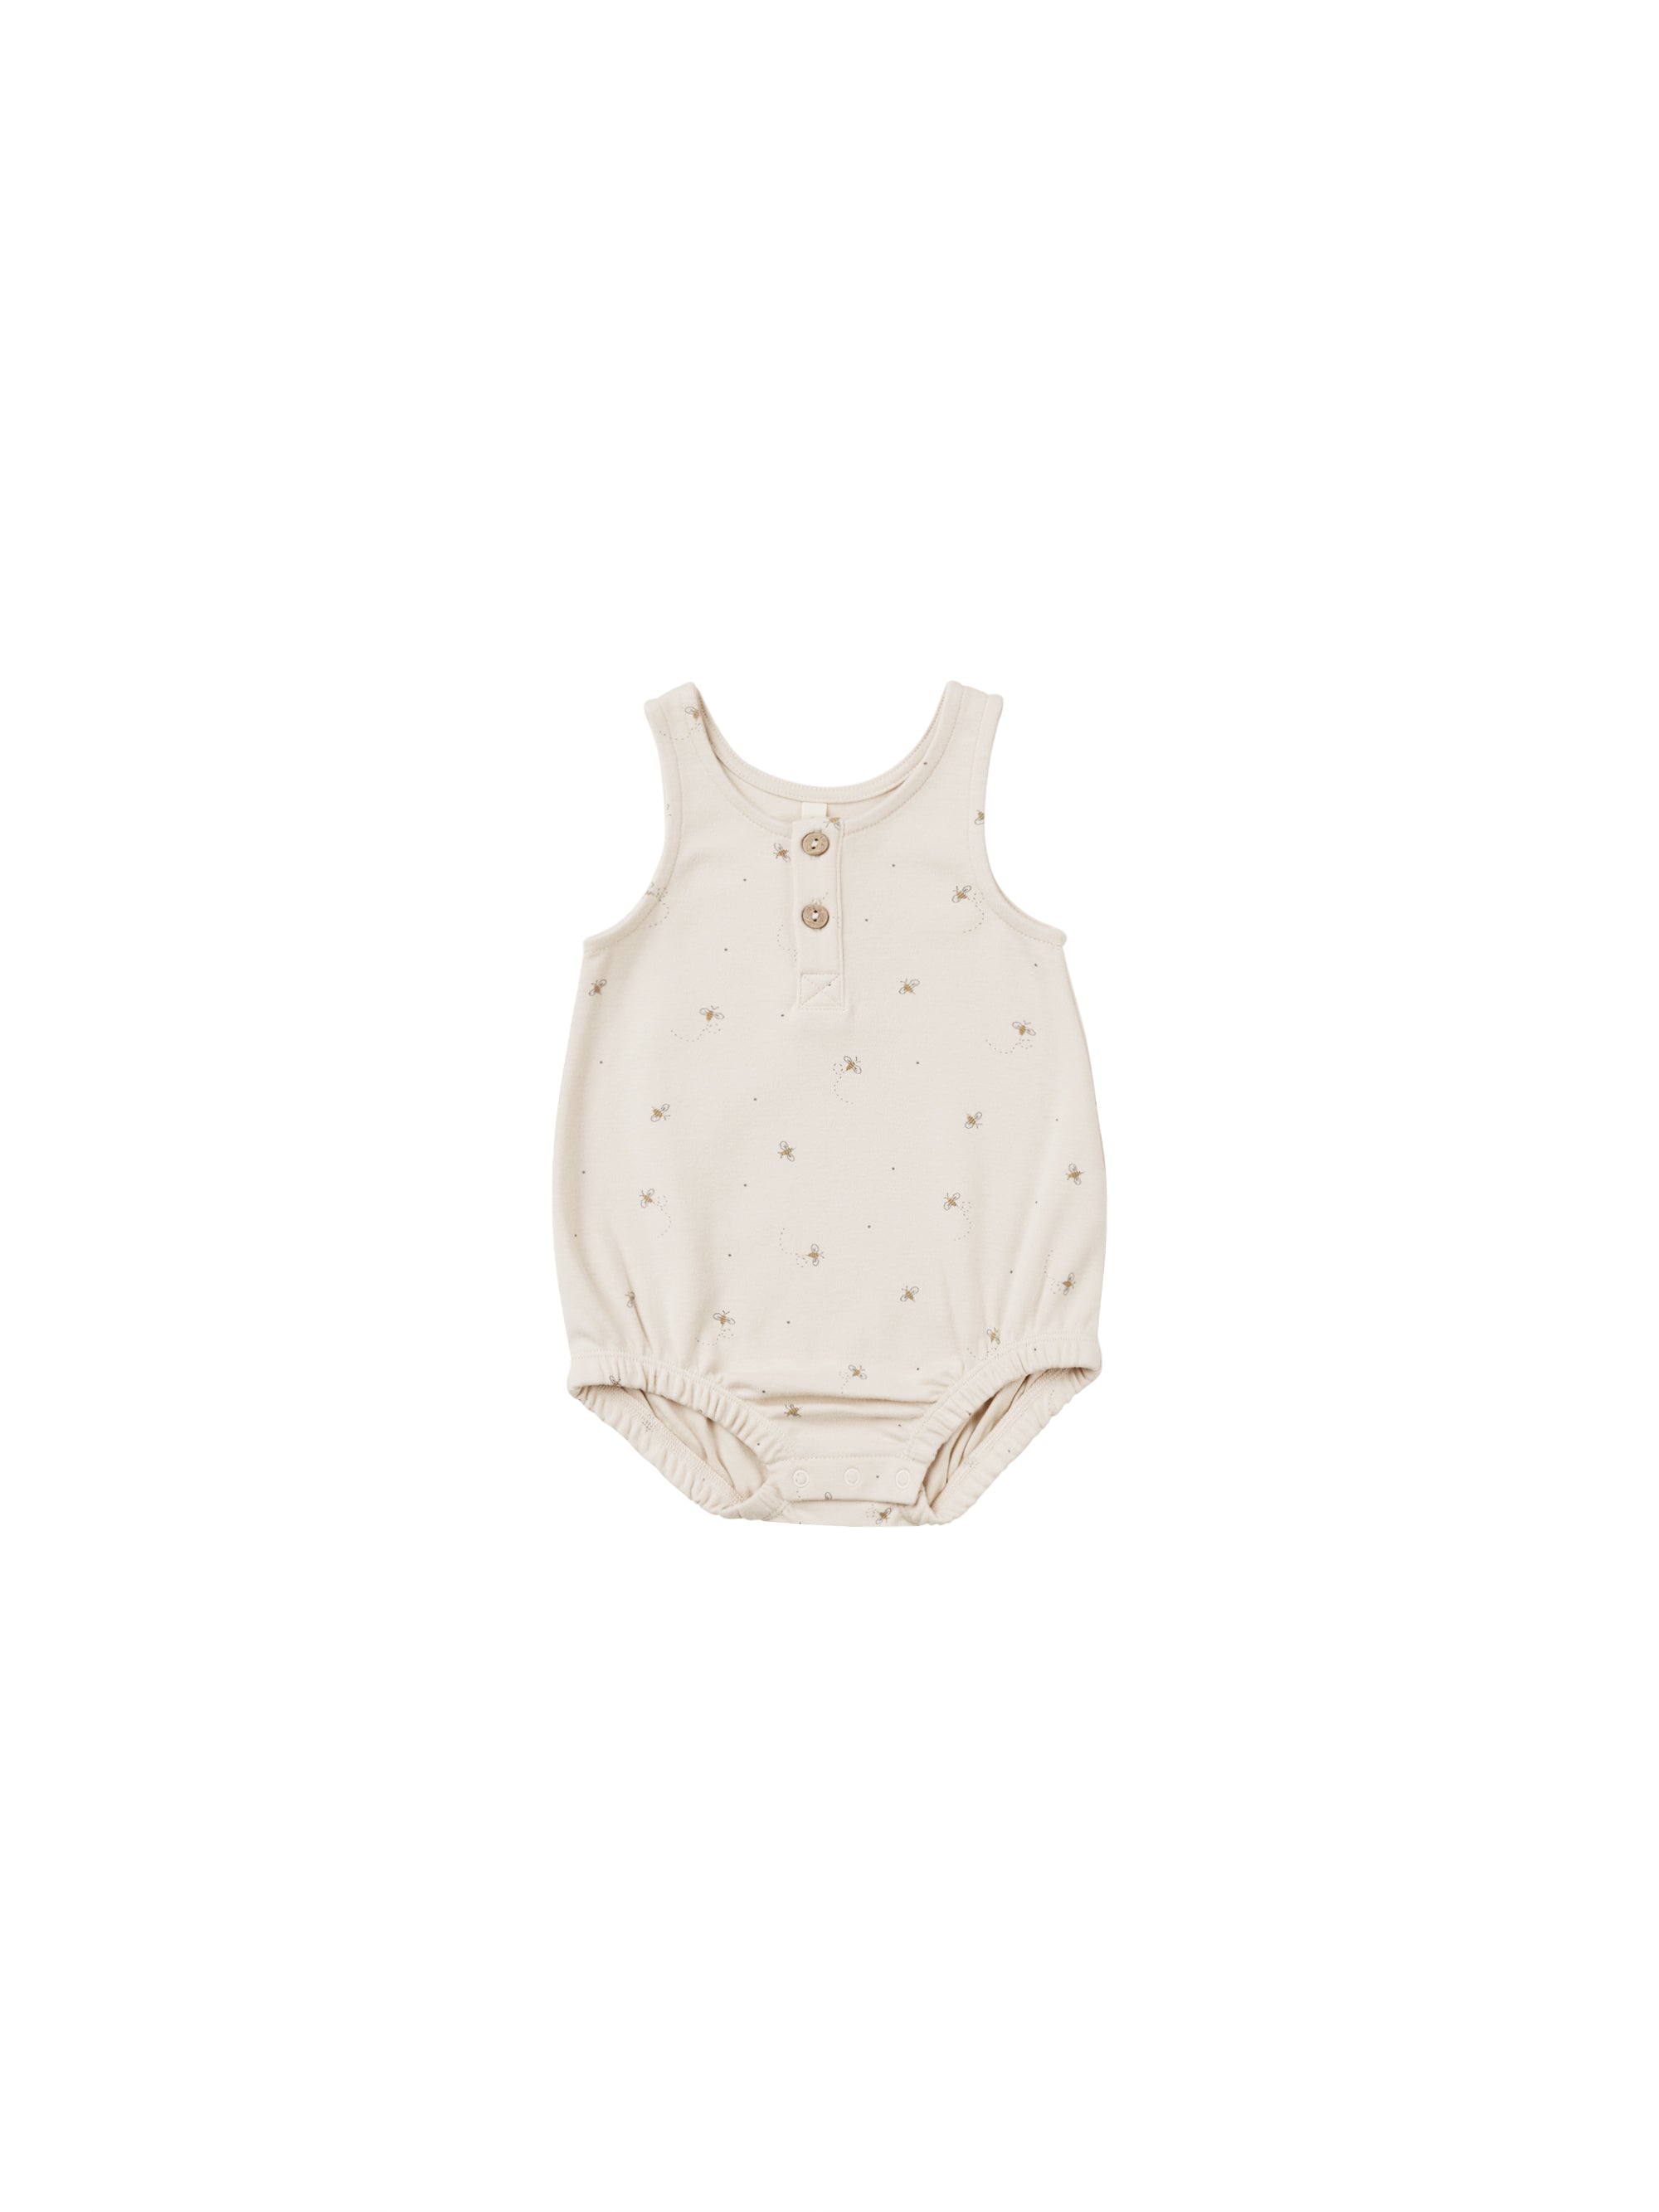 Quincy Mae Sleeveless Bubble Romper Bees